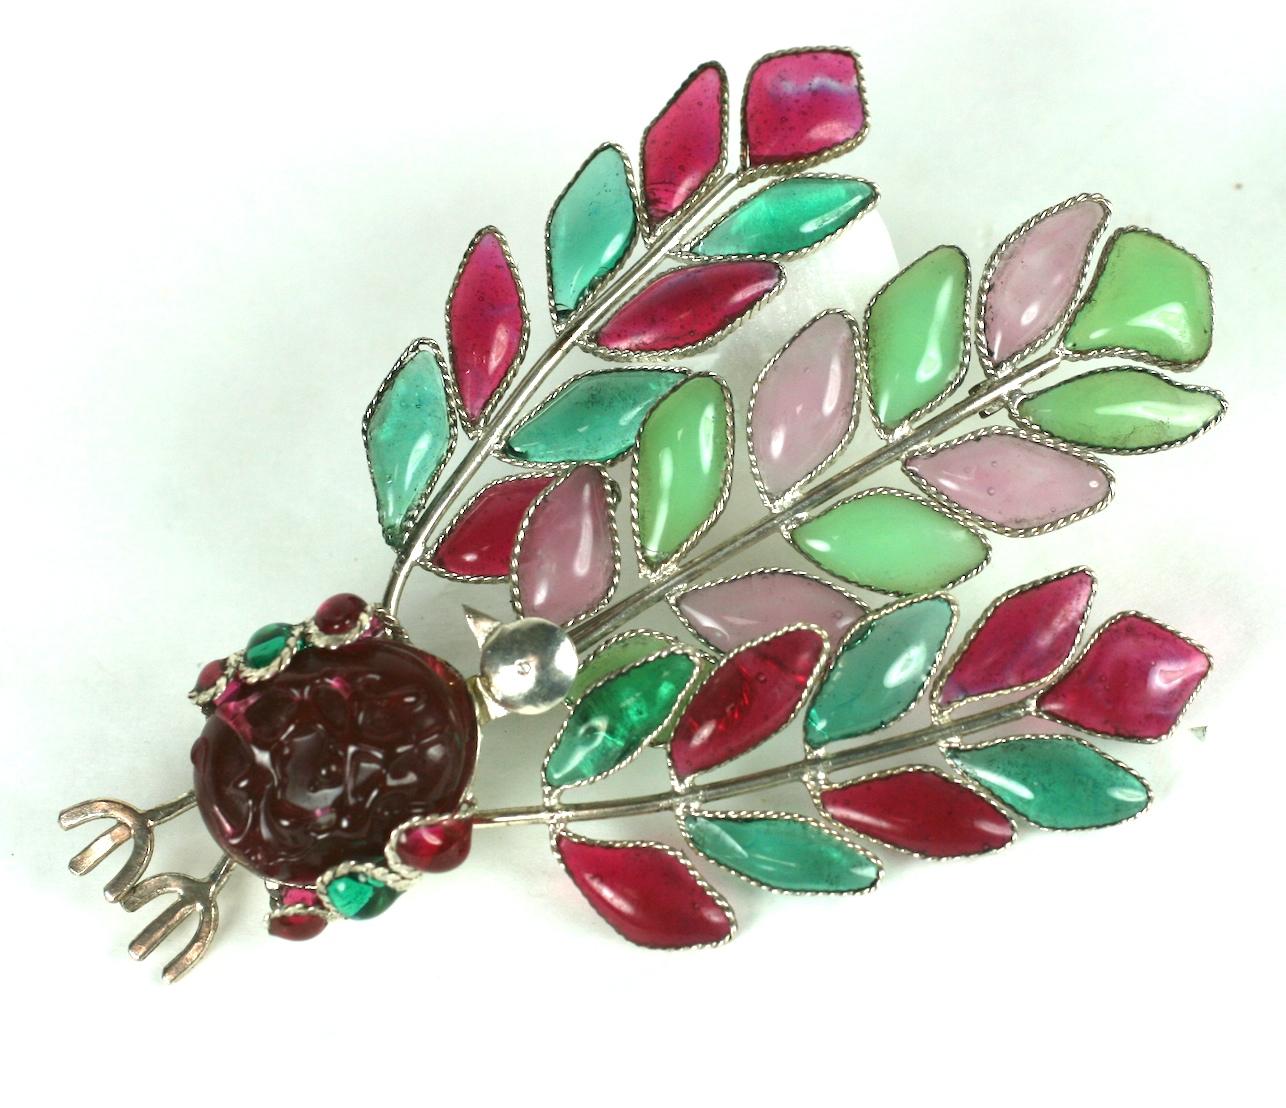 Early Maison Gripoix  Anglo Indian Peacock brooch. A rare 1930s Collectors piece of amythest, emerald, ruby, jade,and rose quartz poured glass enamel and lamp work focal cabochon. Fine wire work settings with early french plunger clasp.
Excellent